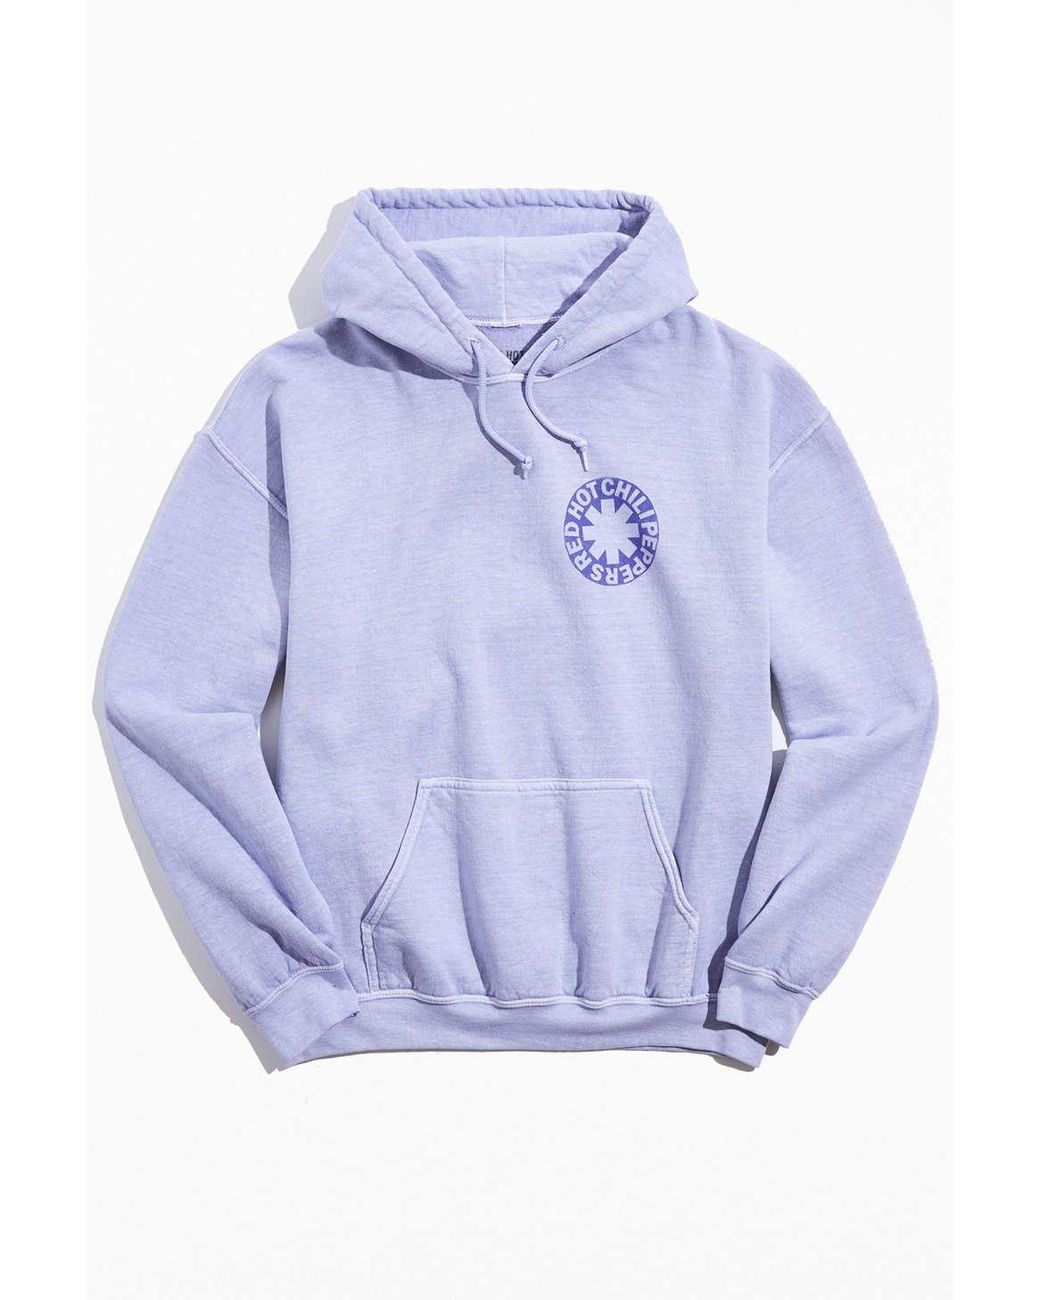 Urban Outfitters Red Hot Chili Peppers Hoodie Sweatshirt in Blue